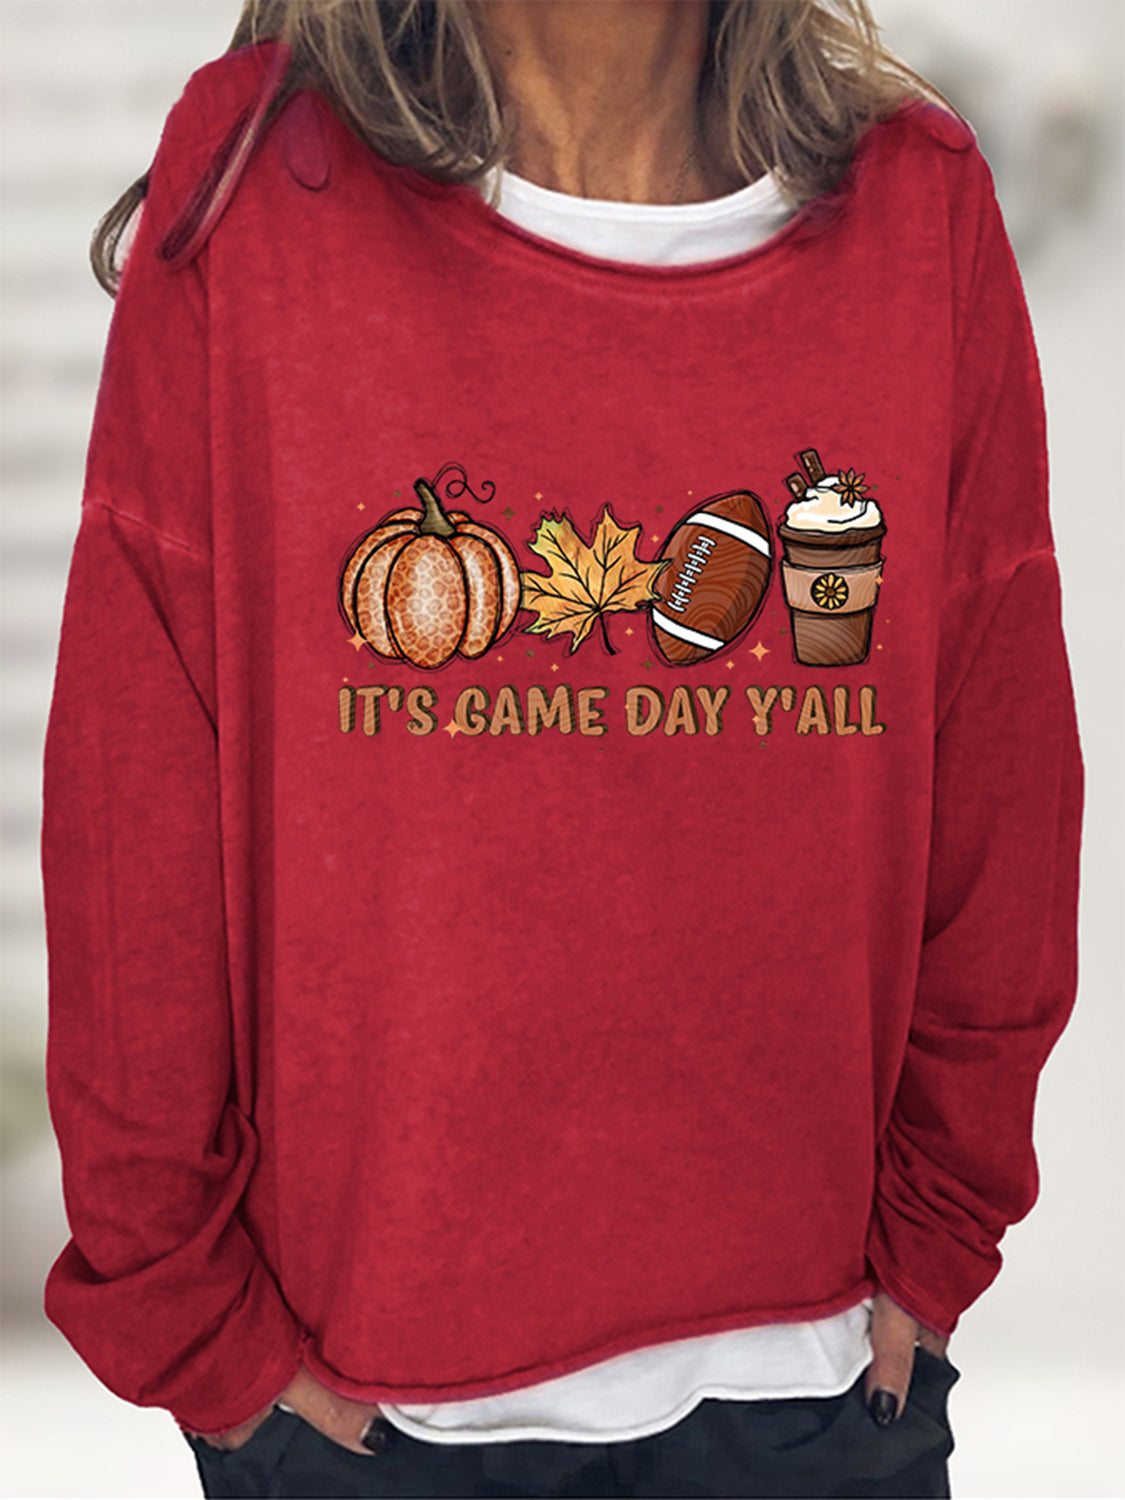 IT’S GAME DAY Y’ALL Graphic Sweatshirt - Red / S - T-Shirts - Shirts & Tops - 10 - 2024